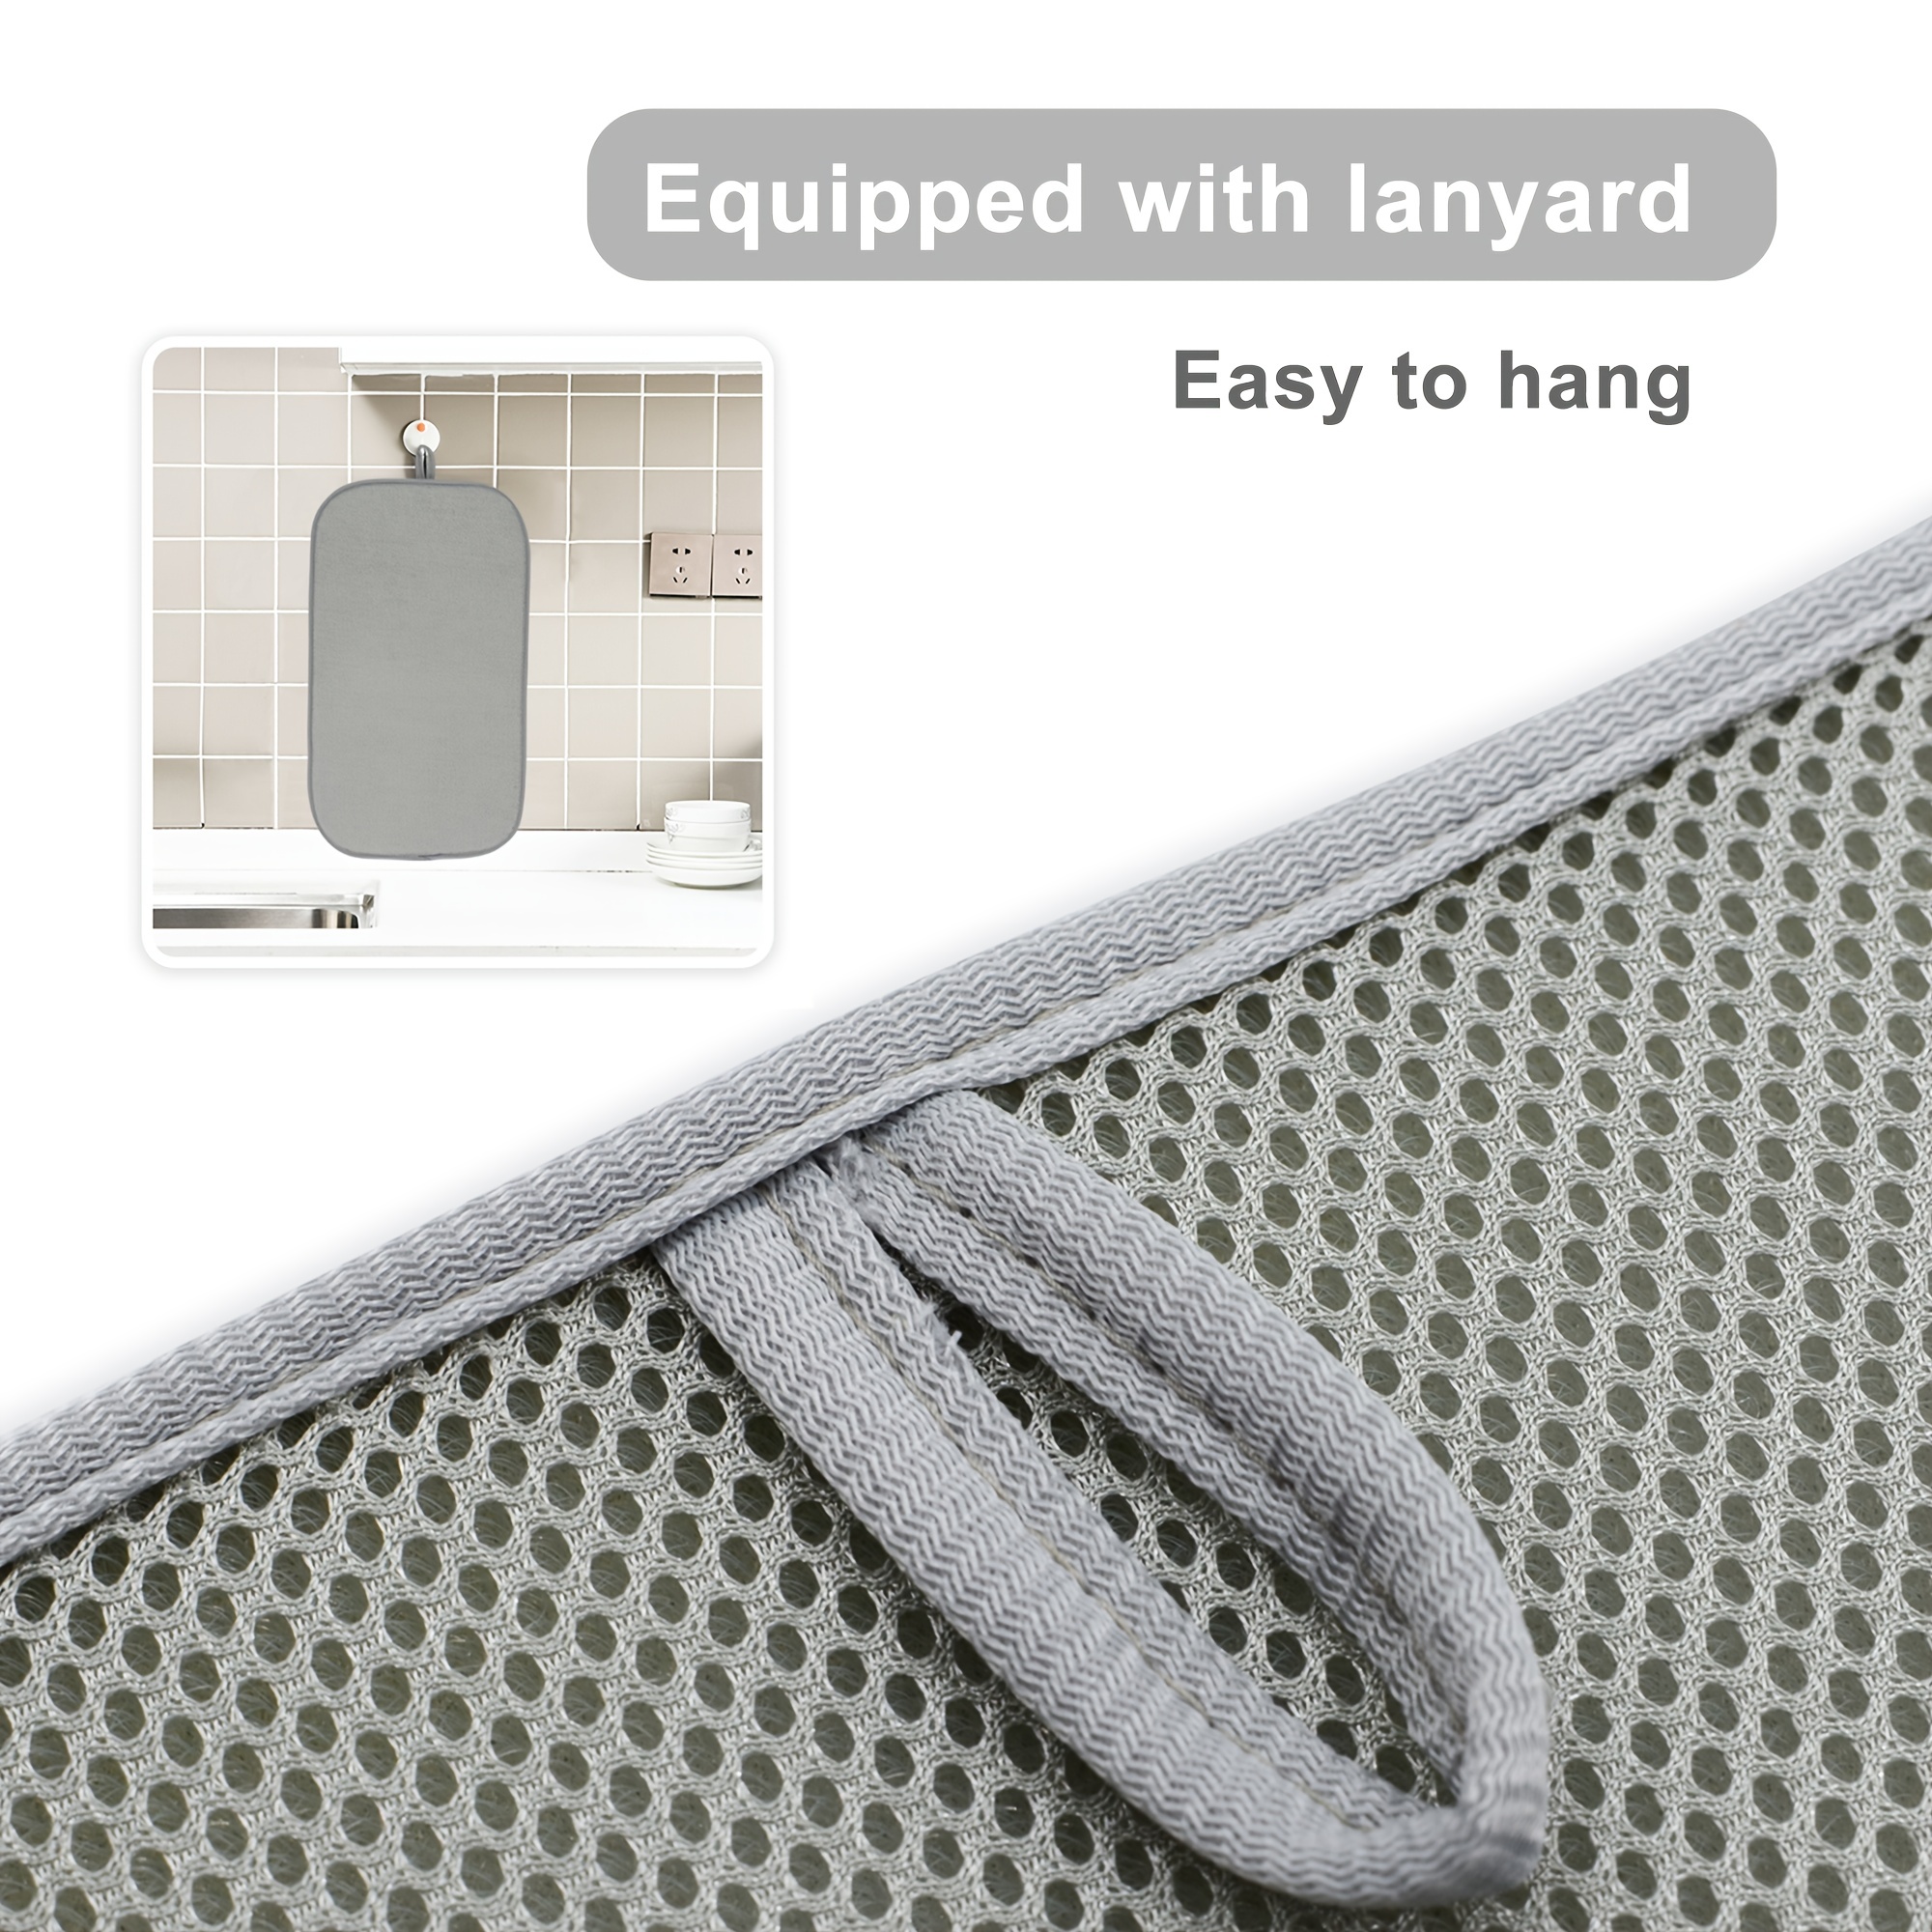 Dish Drying Mat, Ultra Absorbent Microfiber Dishes Drainer Mats